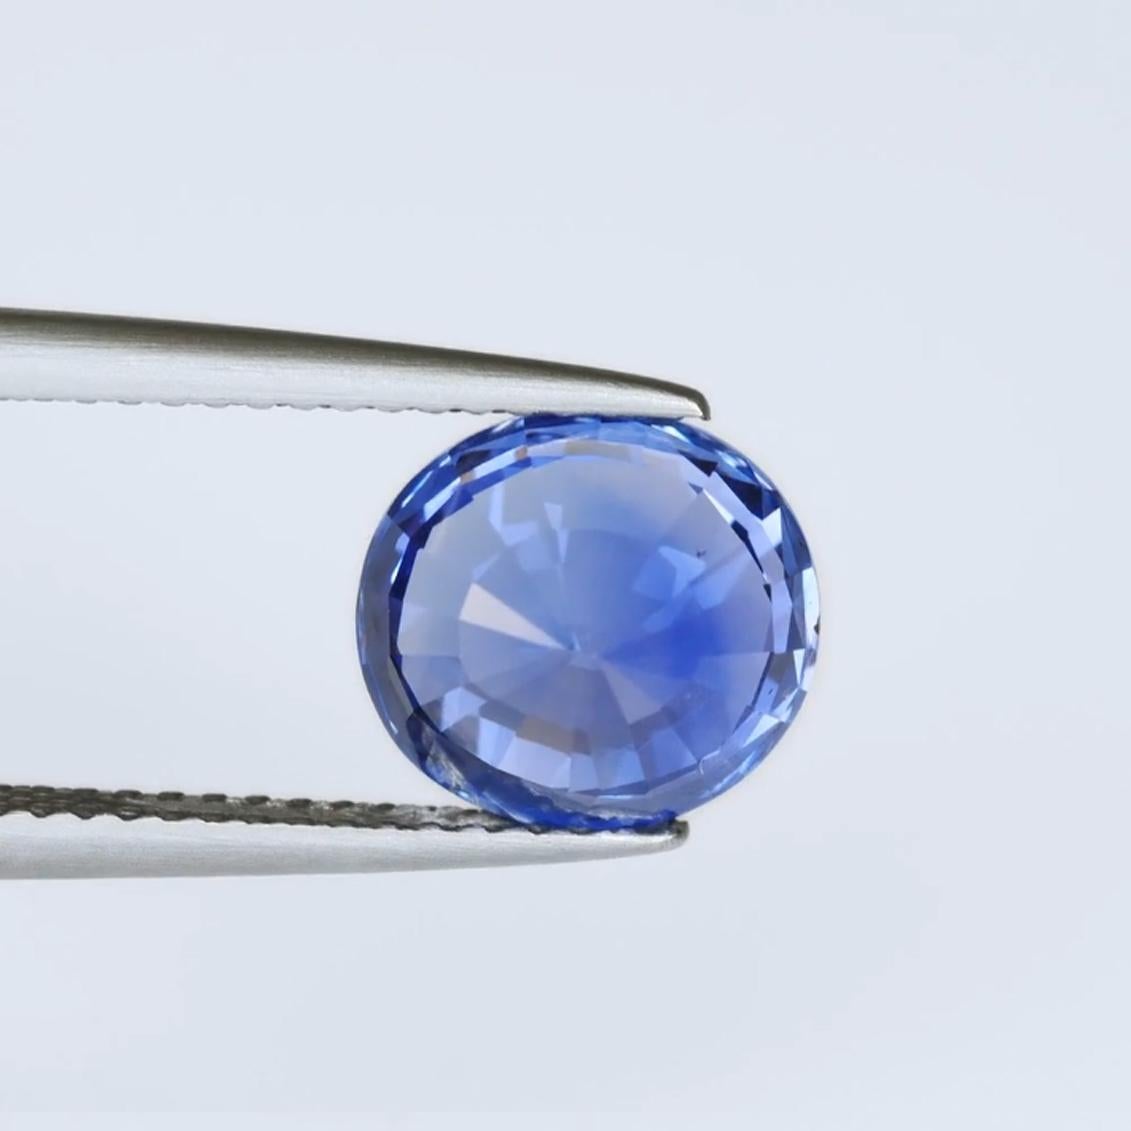 Oval Cut Gublin and GRS Certified 4.17ct Srilankan Blue Sapphire Natural Gemstone For Sale